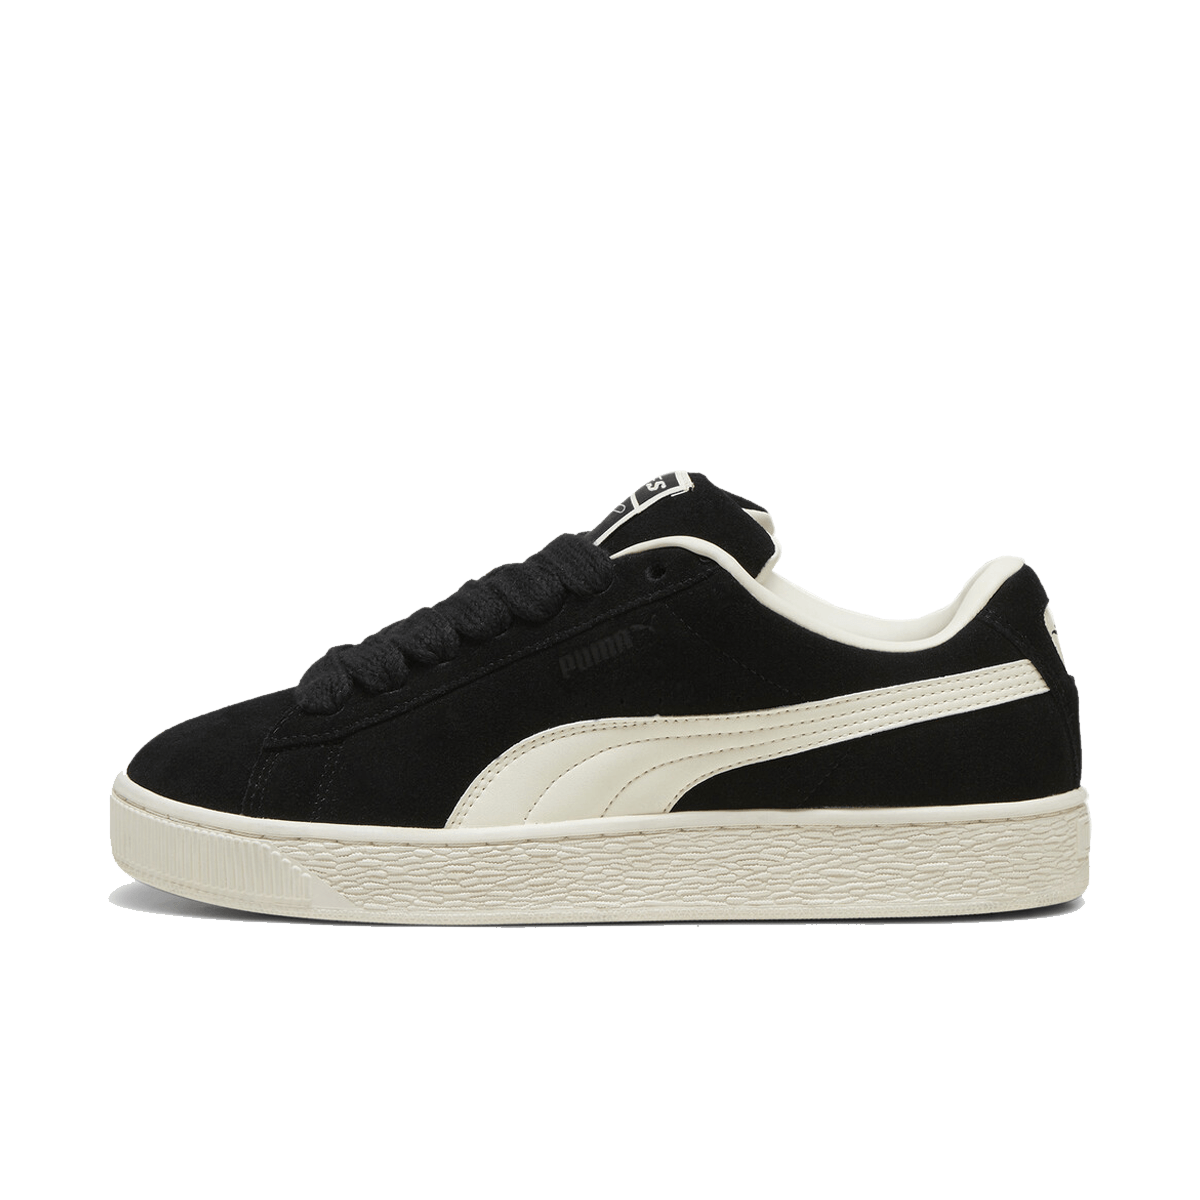 Pleasures x Puma Suede XL 'Black Frosted Ivory' 396057-01